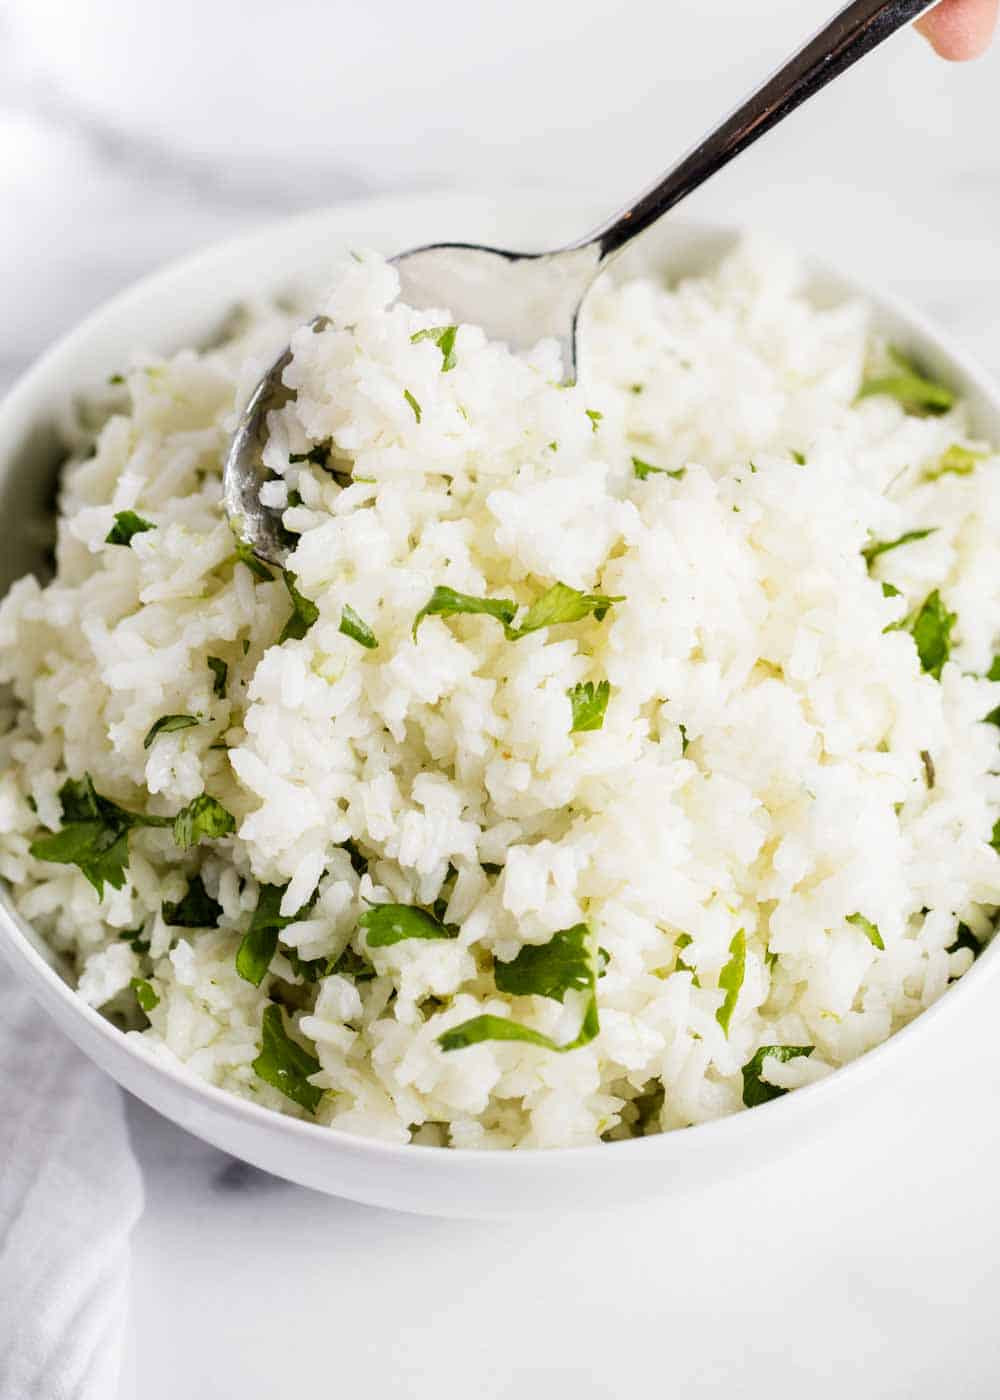 The Best Ideas for Qdoba Mexican Eats Cilantro Lime Rice - Home, Family ...